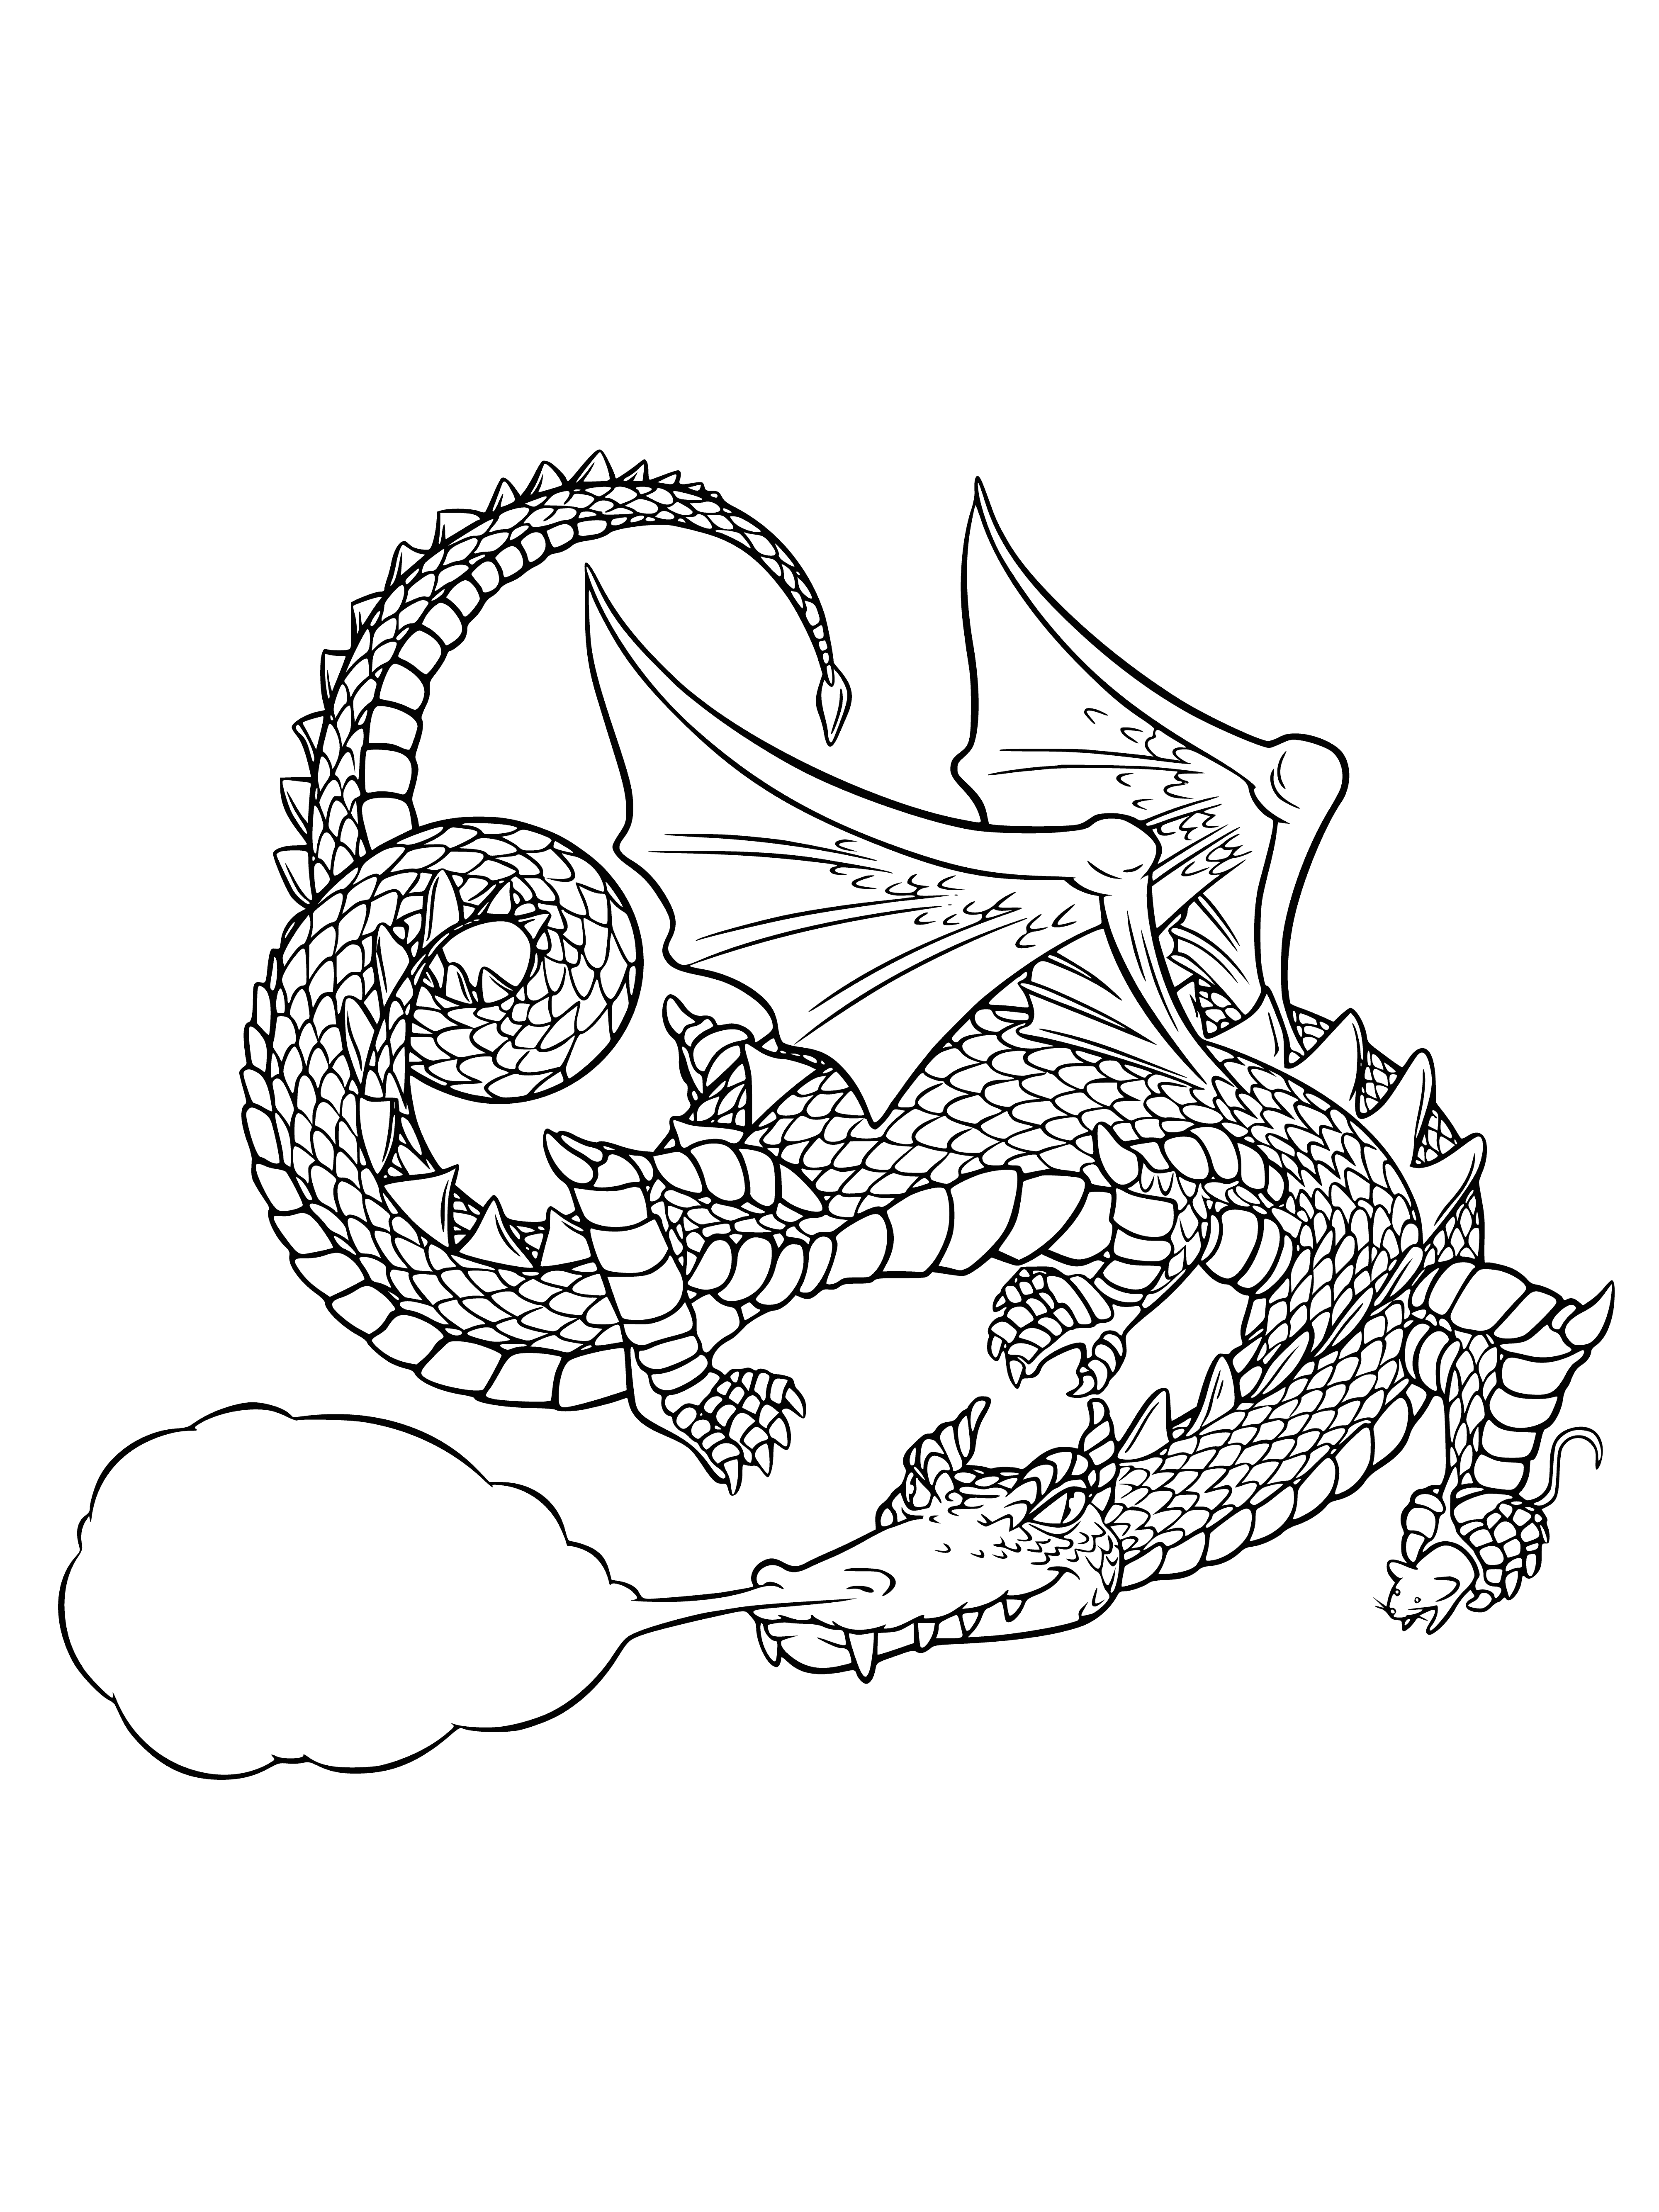 The Dragon coloring page